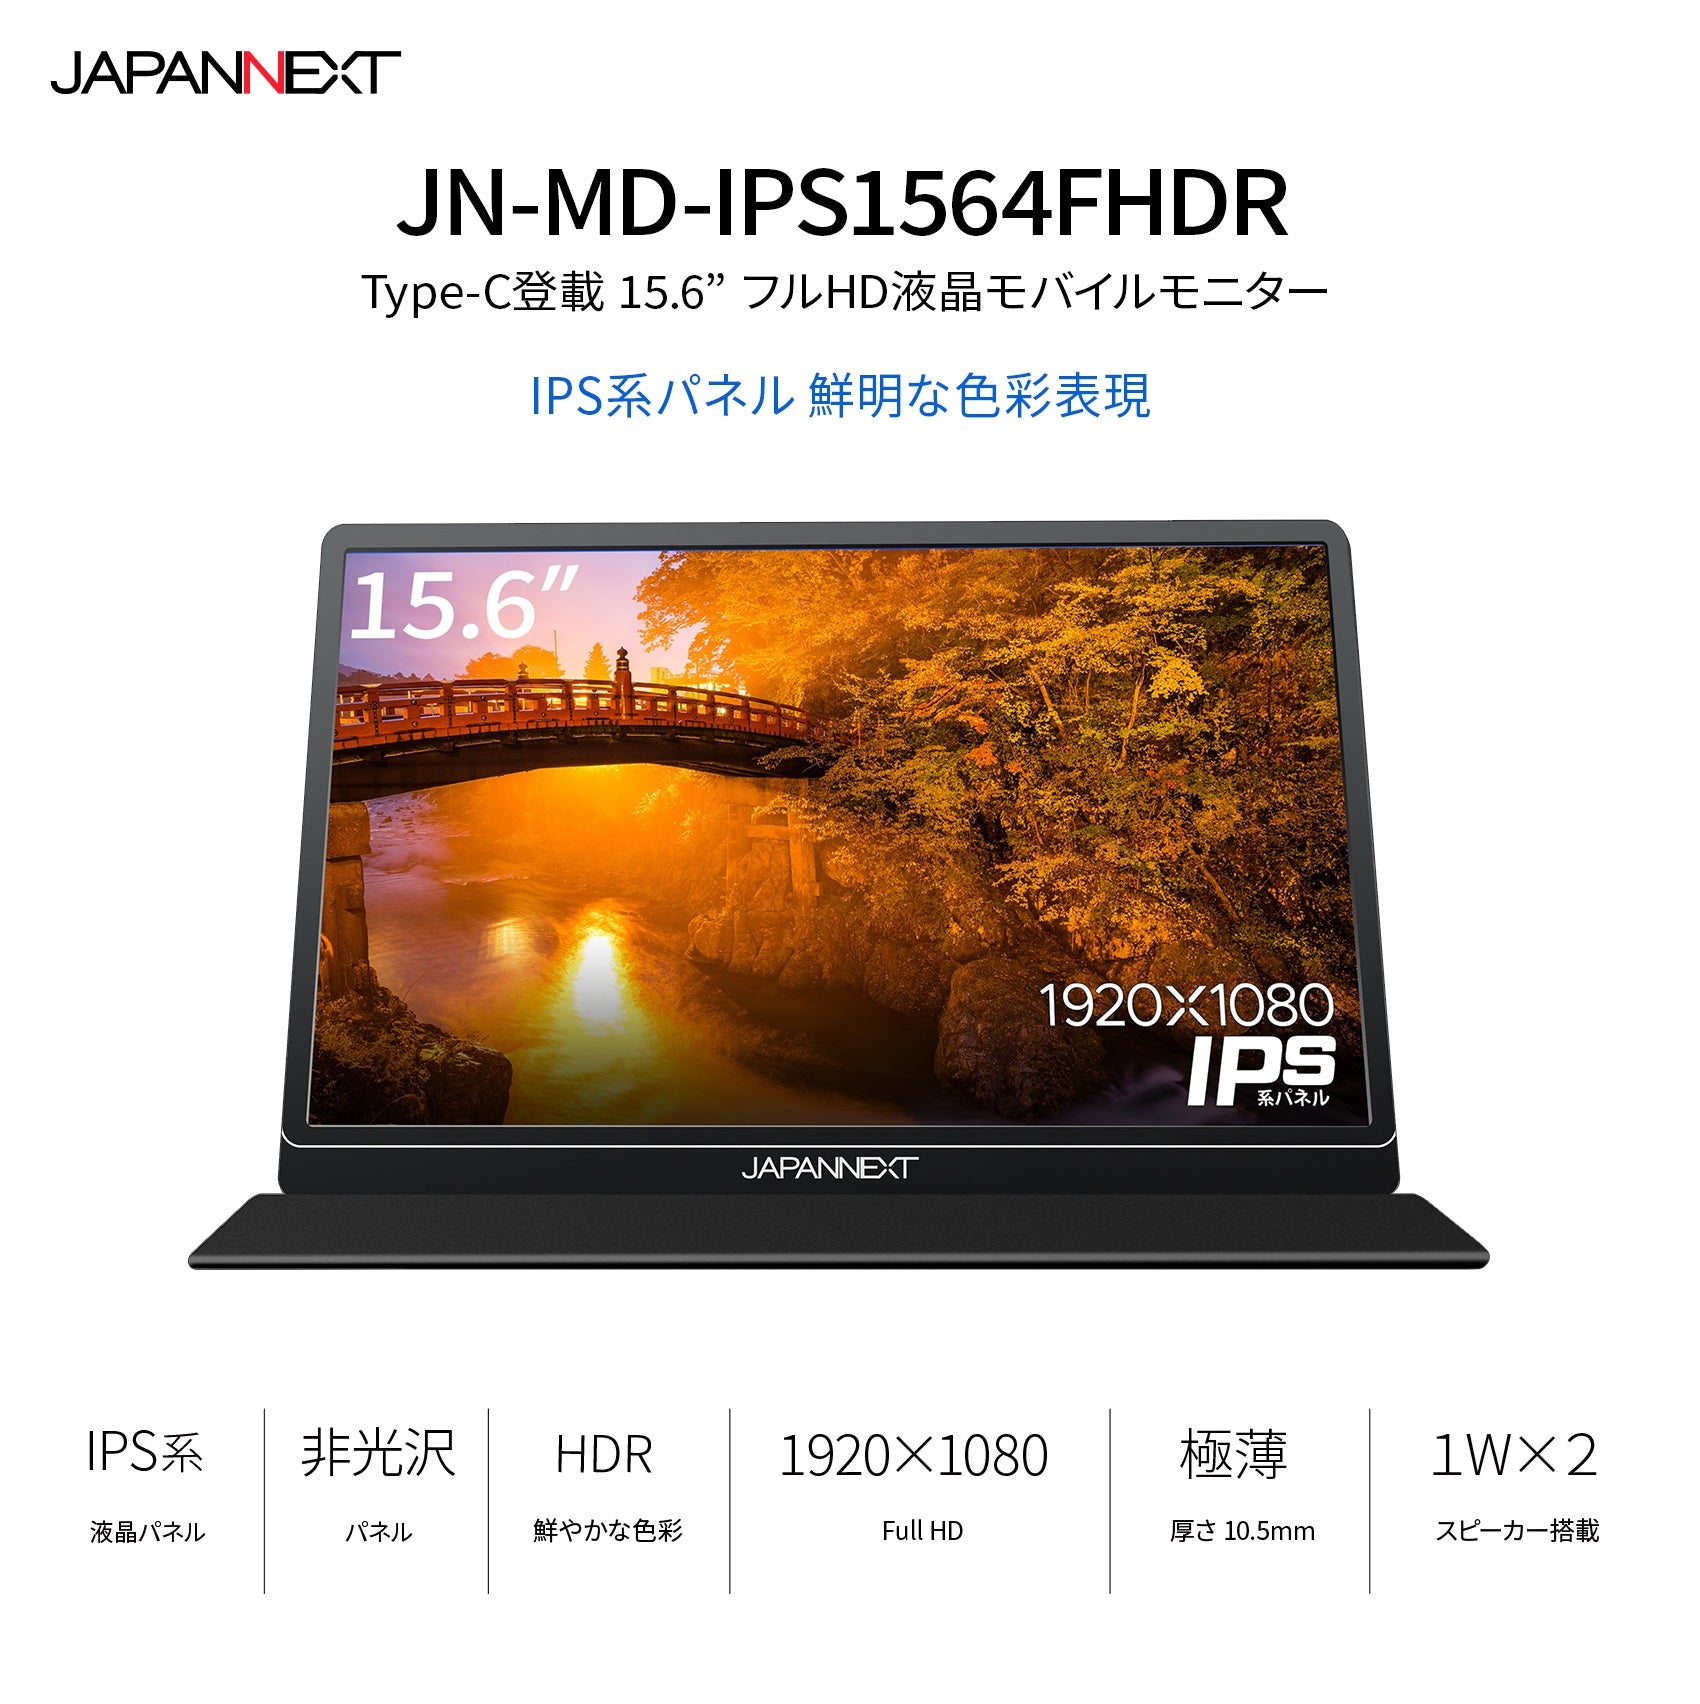 JN-MD-IPS1564FHDR